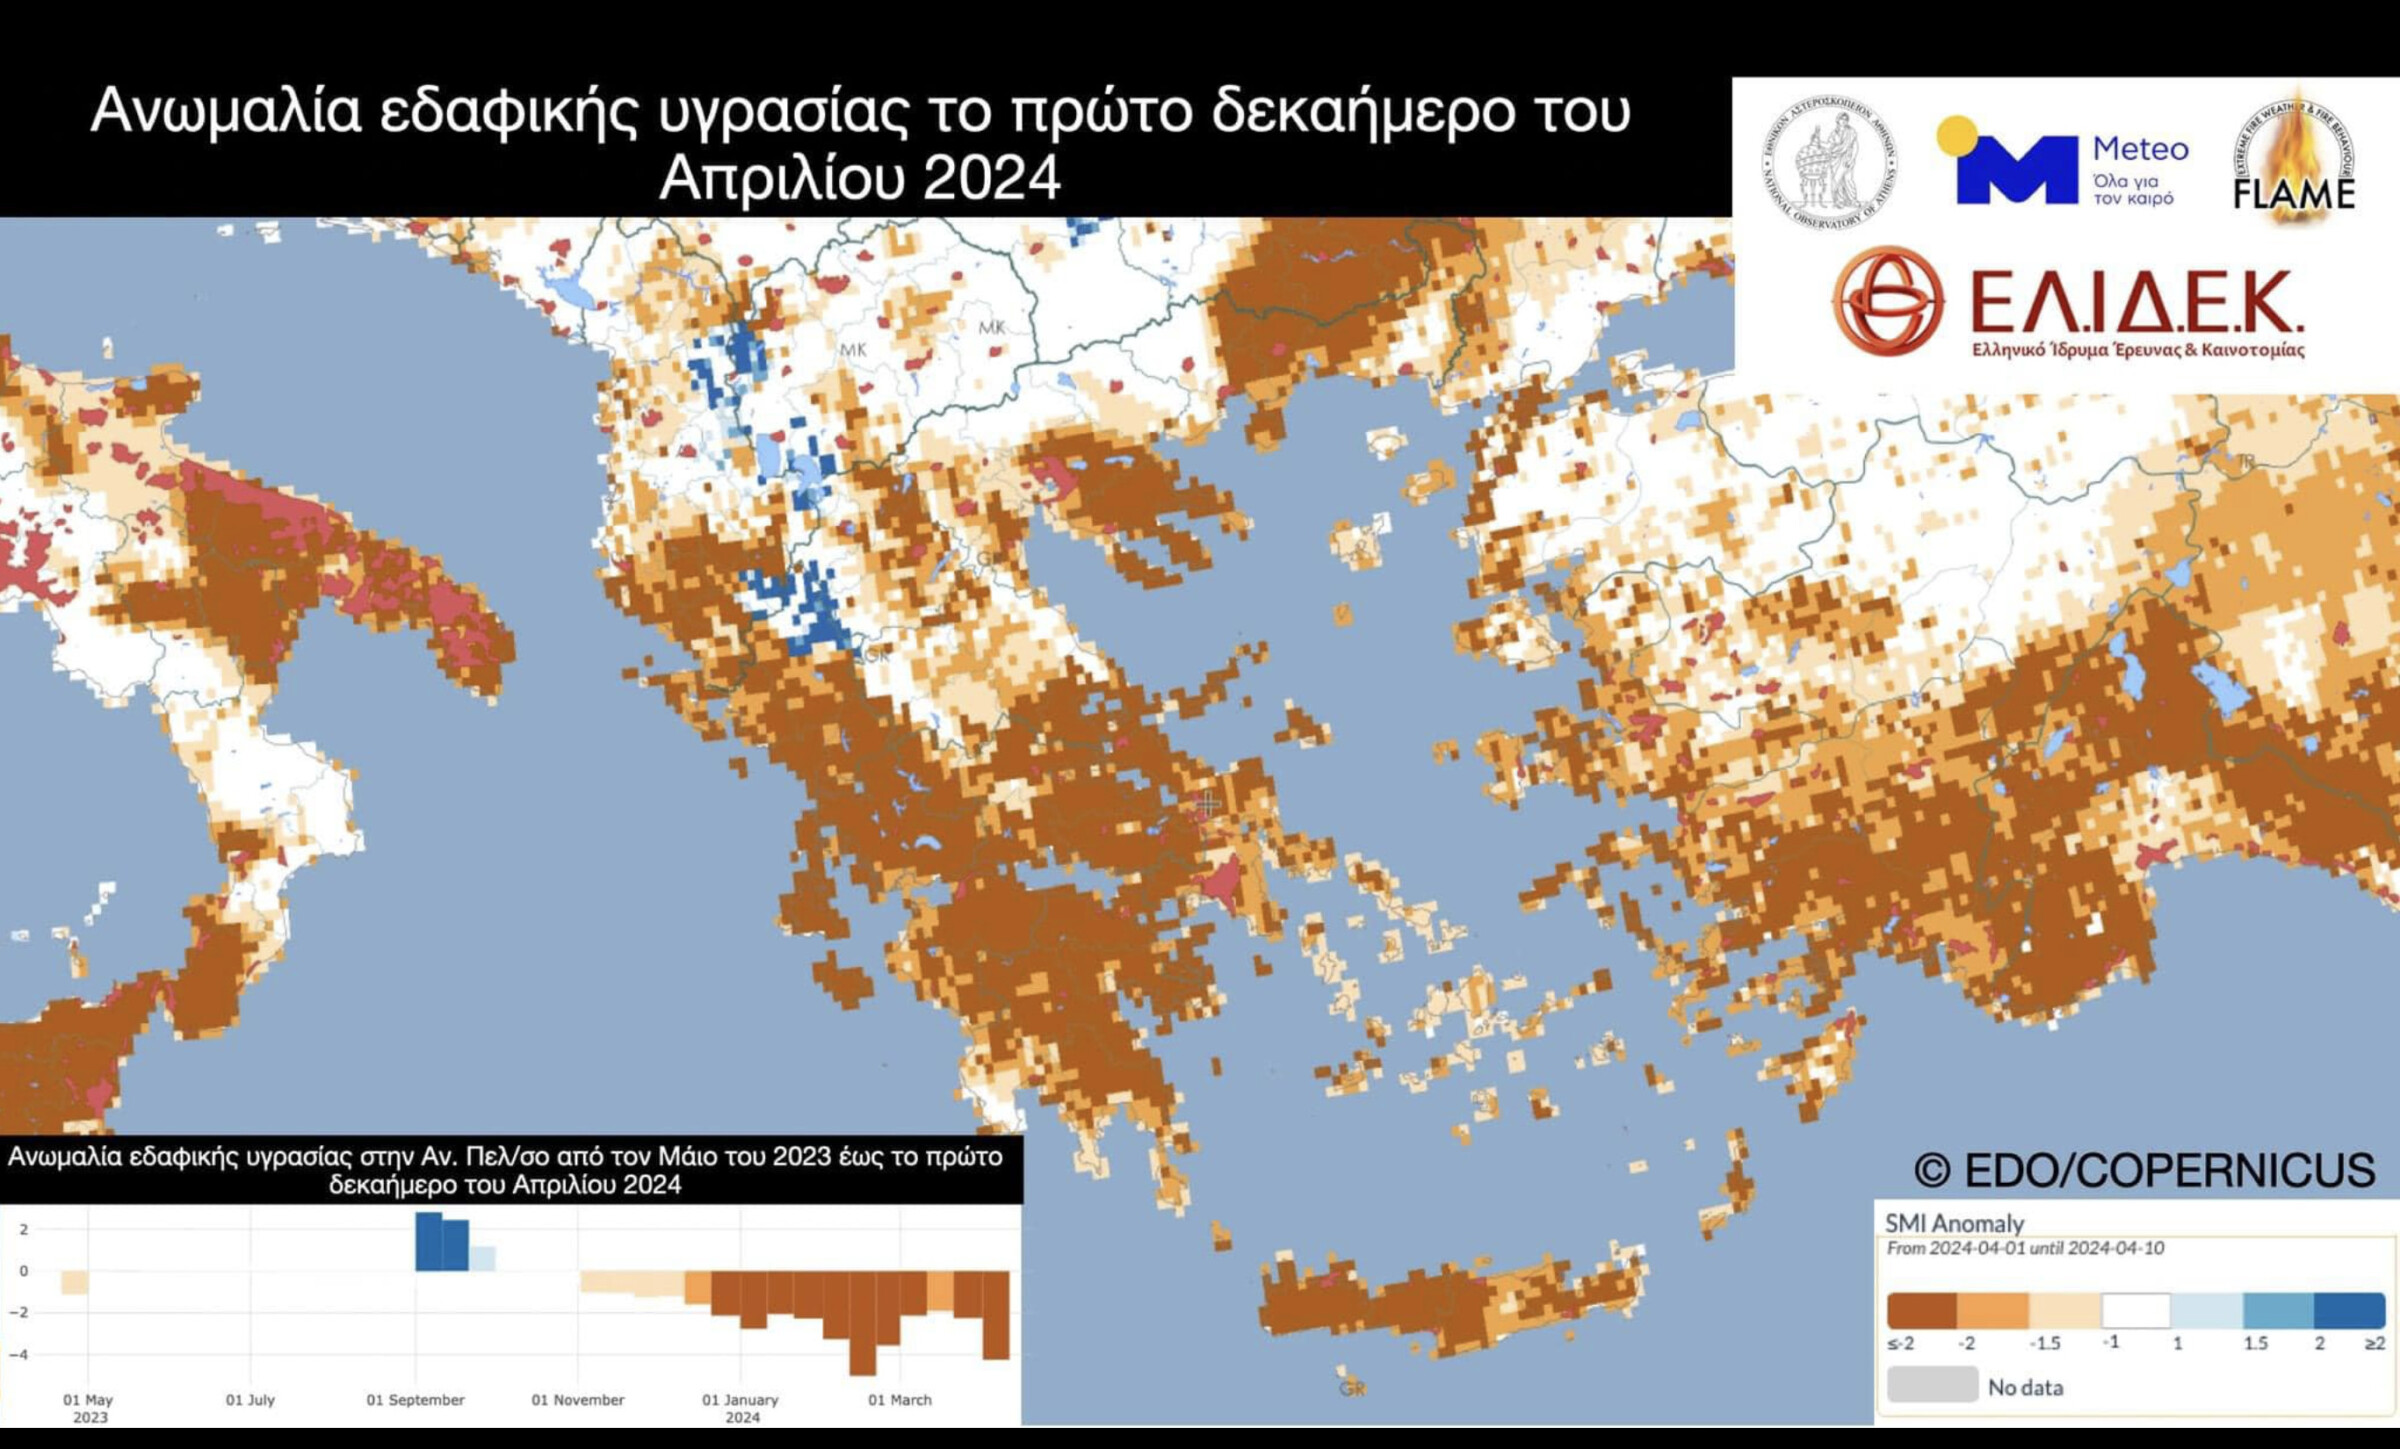 The map is centred on Greece. Crete, the Peloponnese, Sterea, Epirus and Evros are shown as dark brown, a colouring that indicates abnormal soil moisture values. 